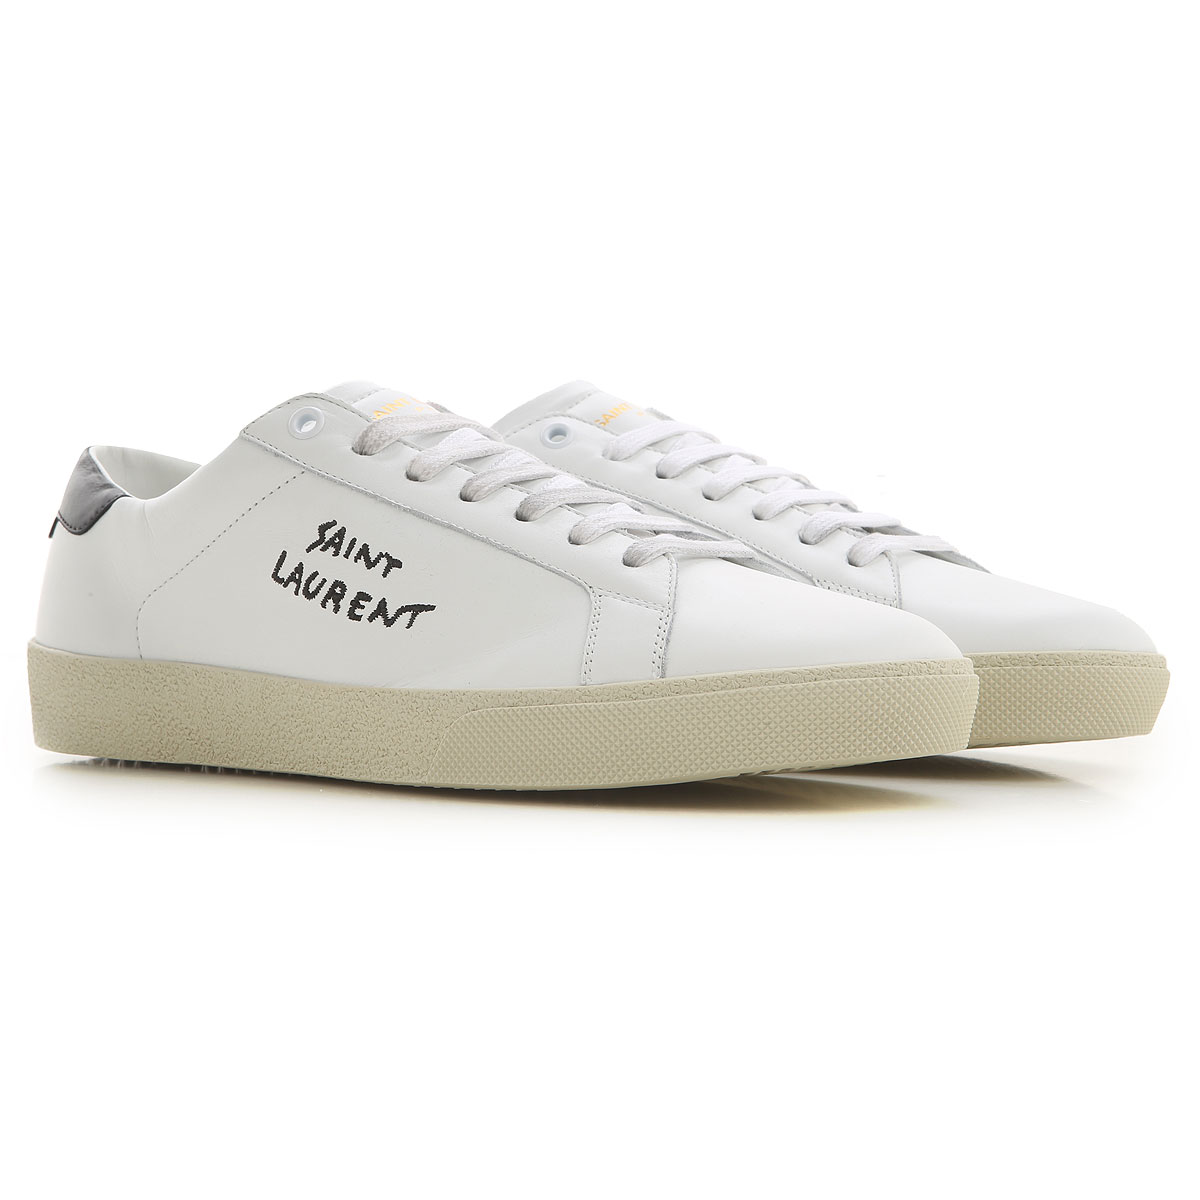 White, Leather, 2019, 10 6.5 7 7.5 7.75 